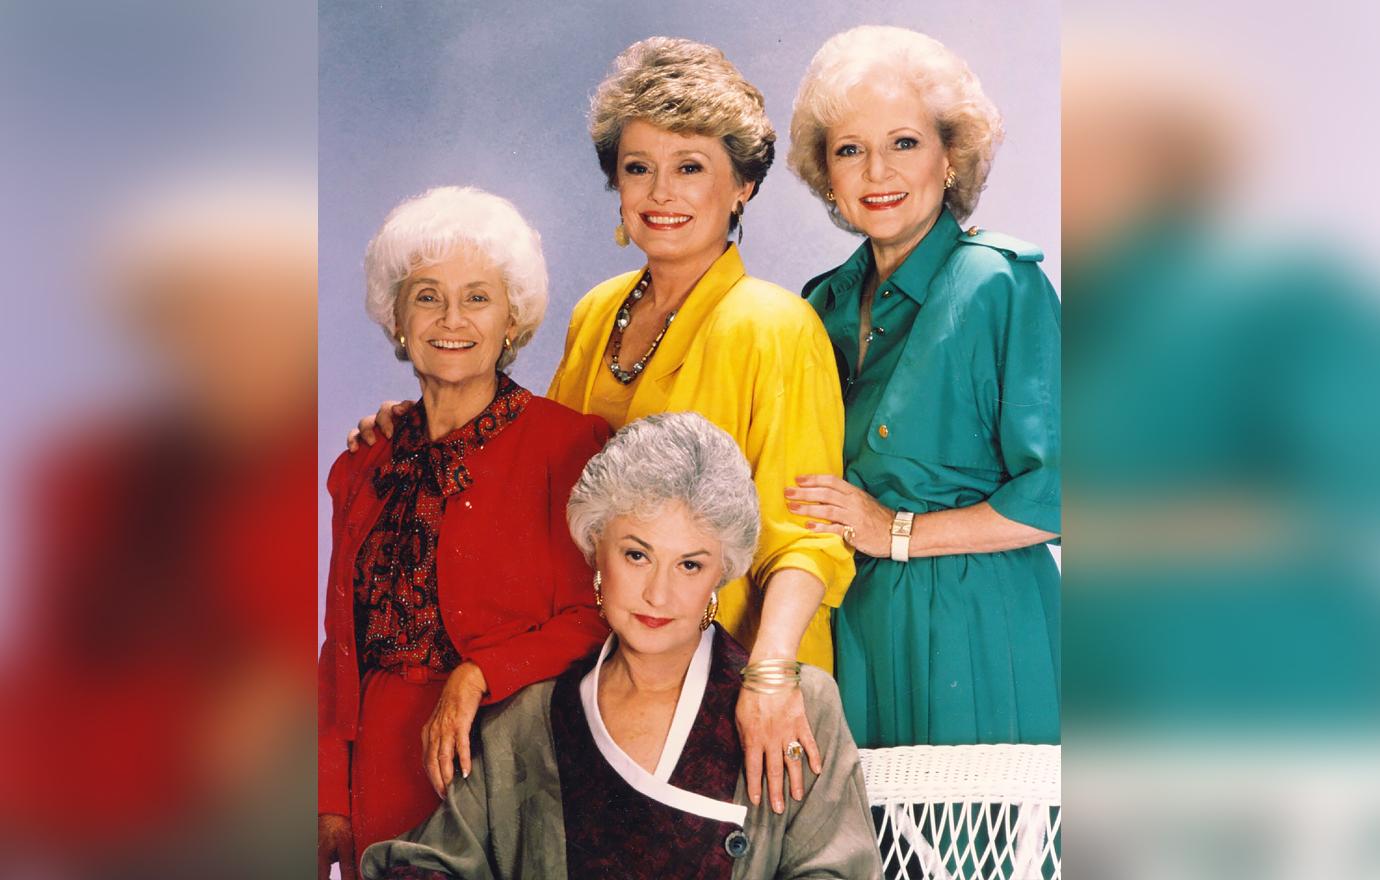 11 Golden Girls Gifts for People Who Love Betty White - EventOTB